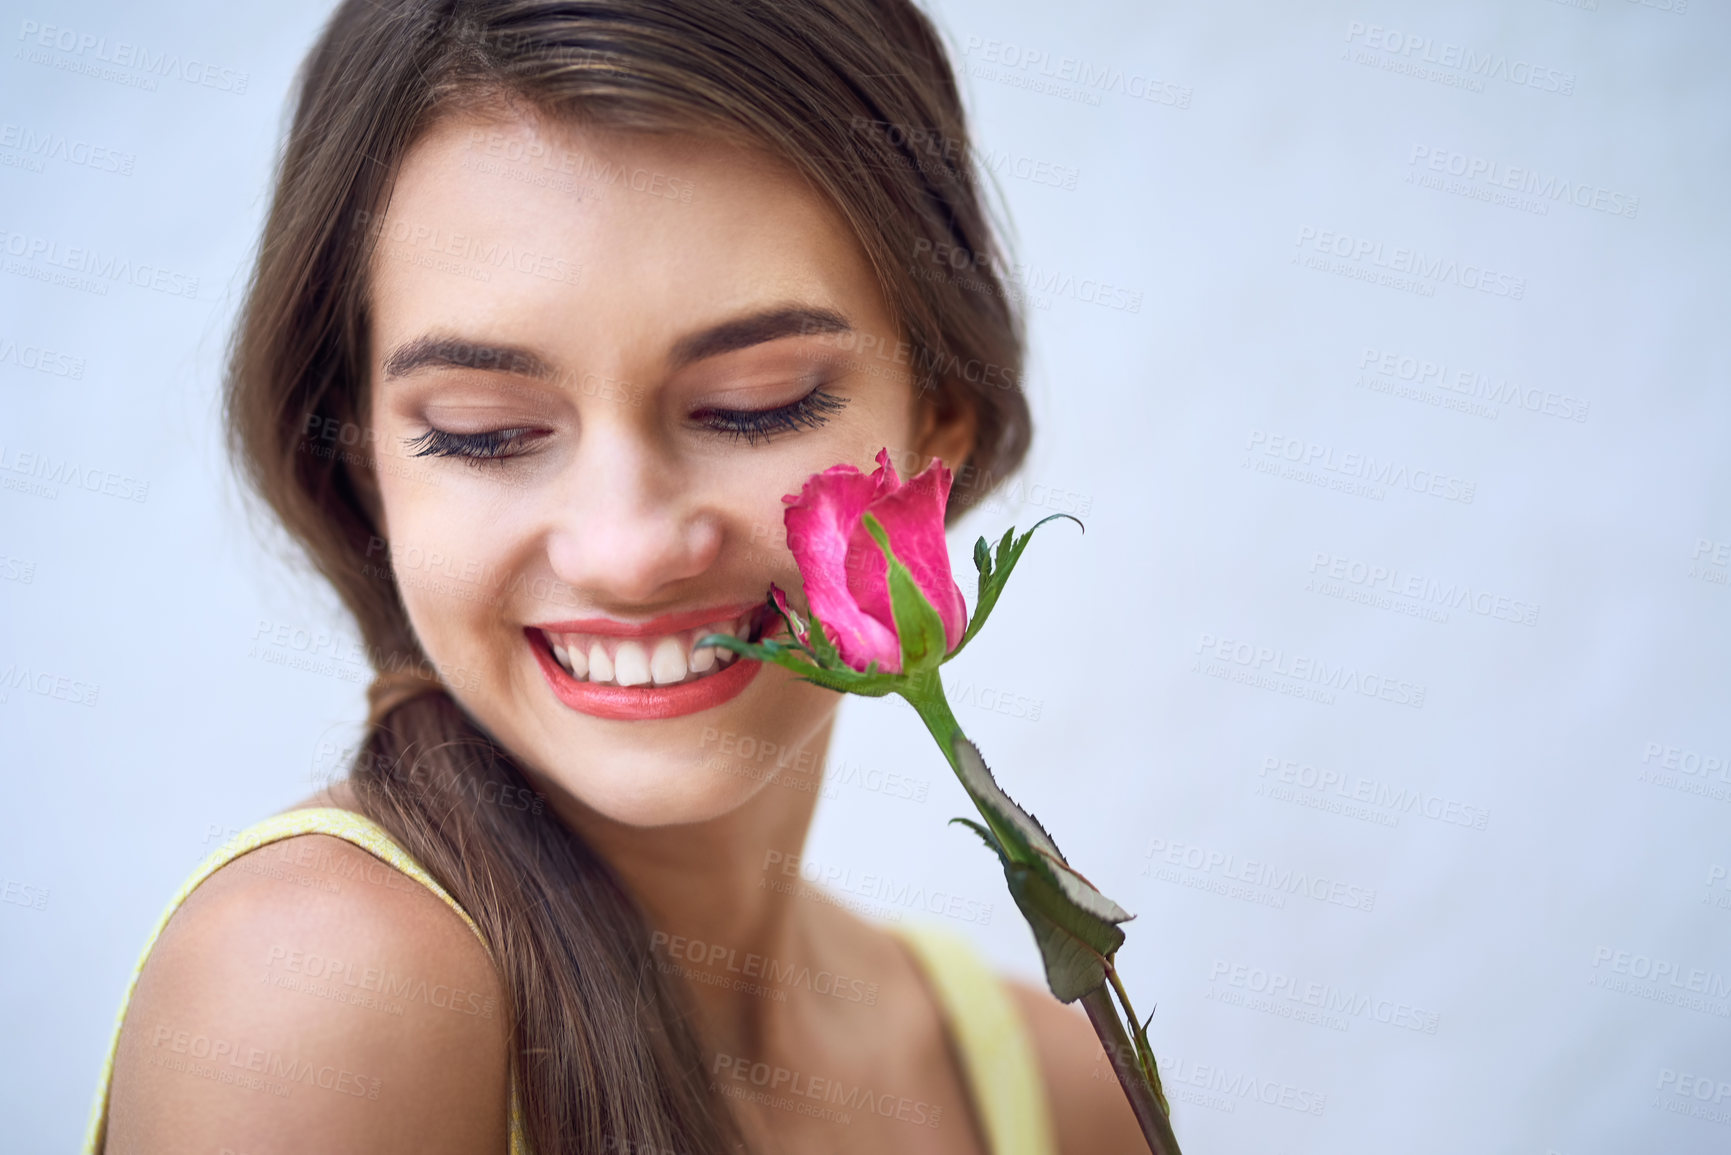 Buy stock photo Studio closeup of a cheerful young woman holding a pink rose next to her face while standing against a grey background